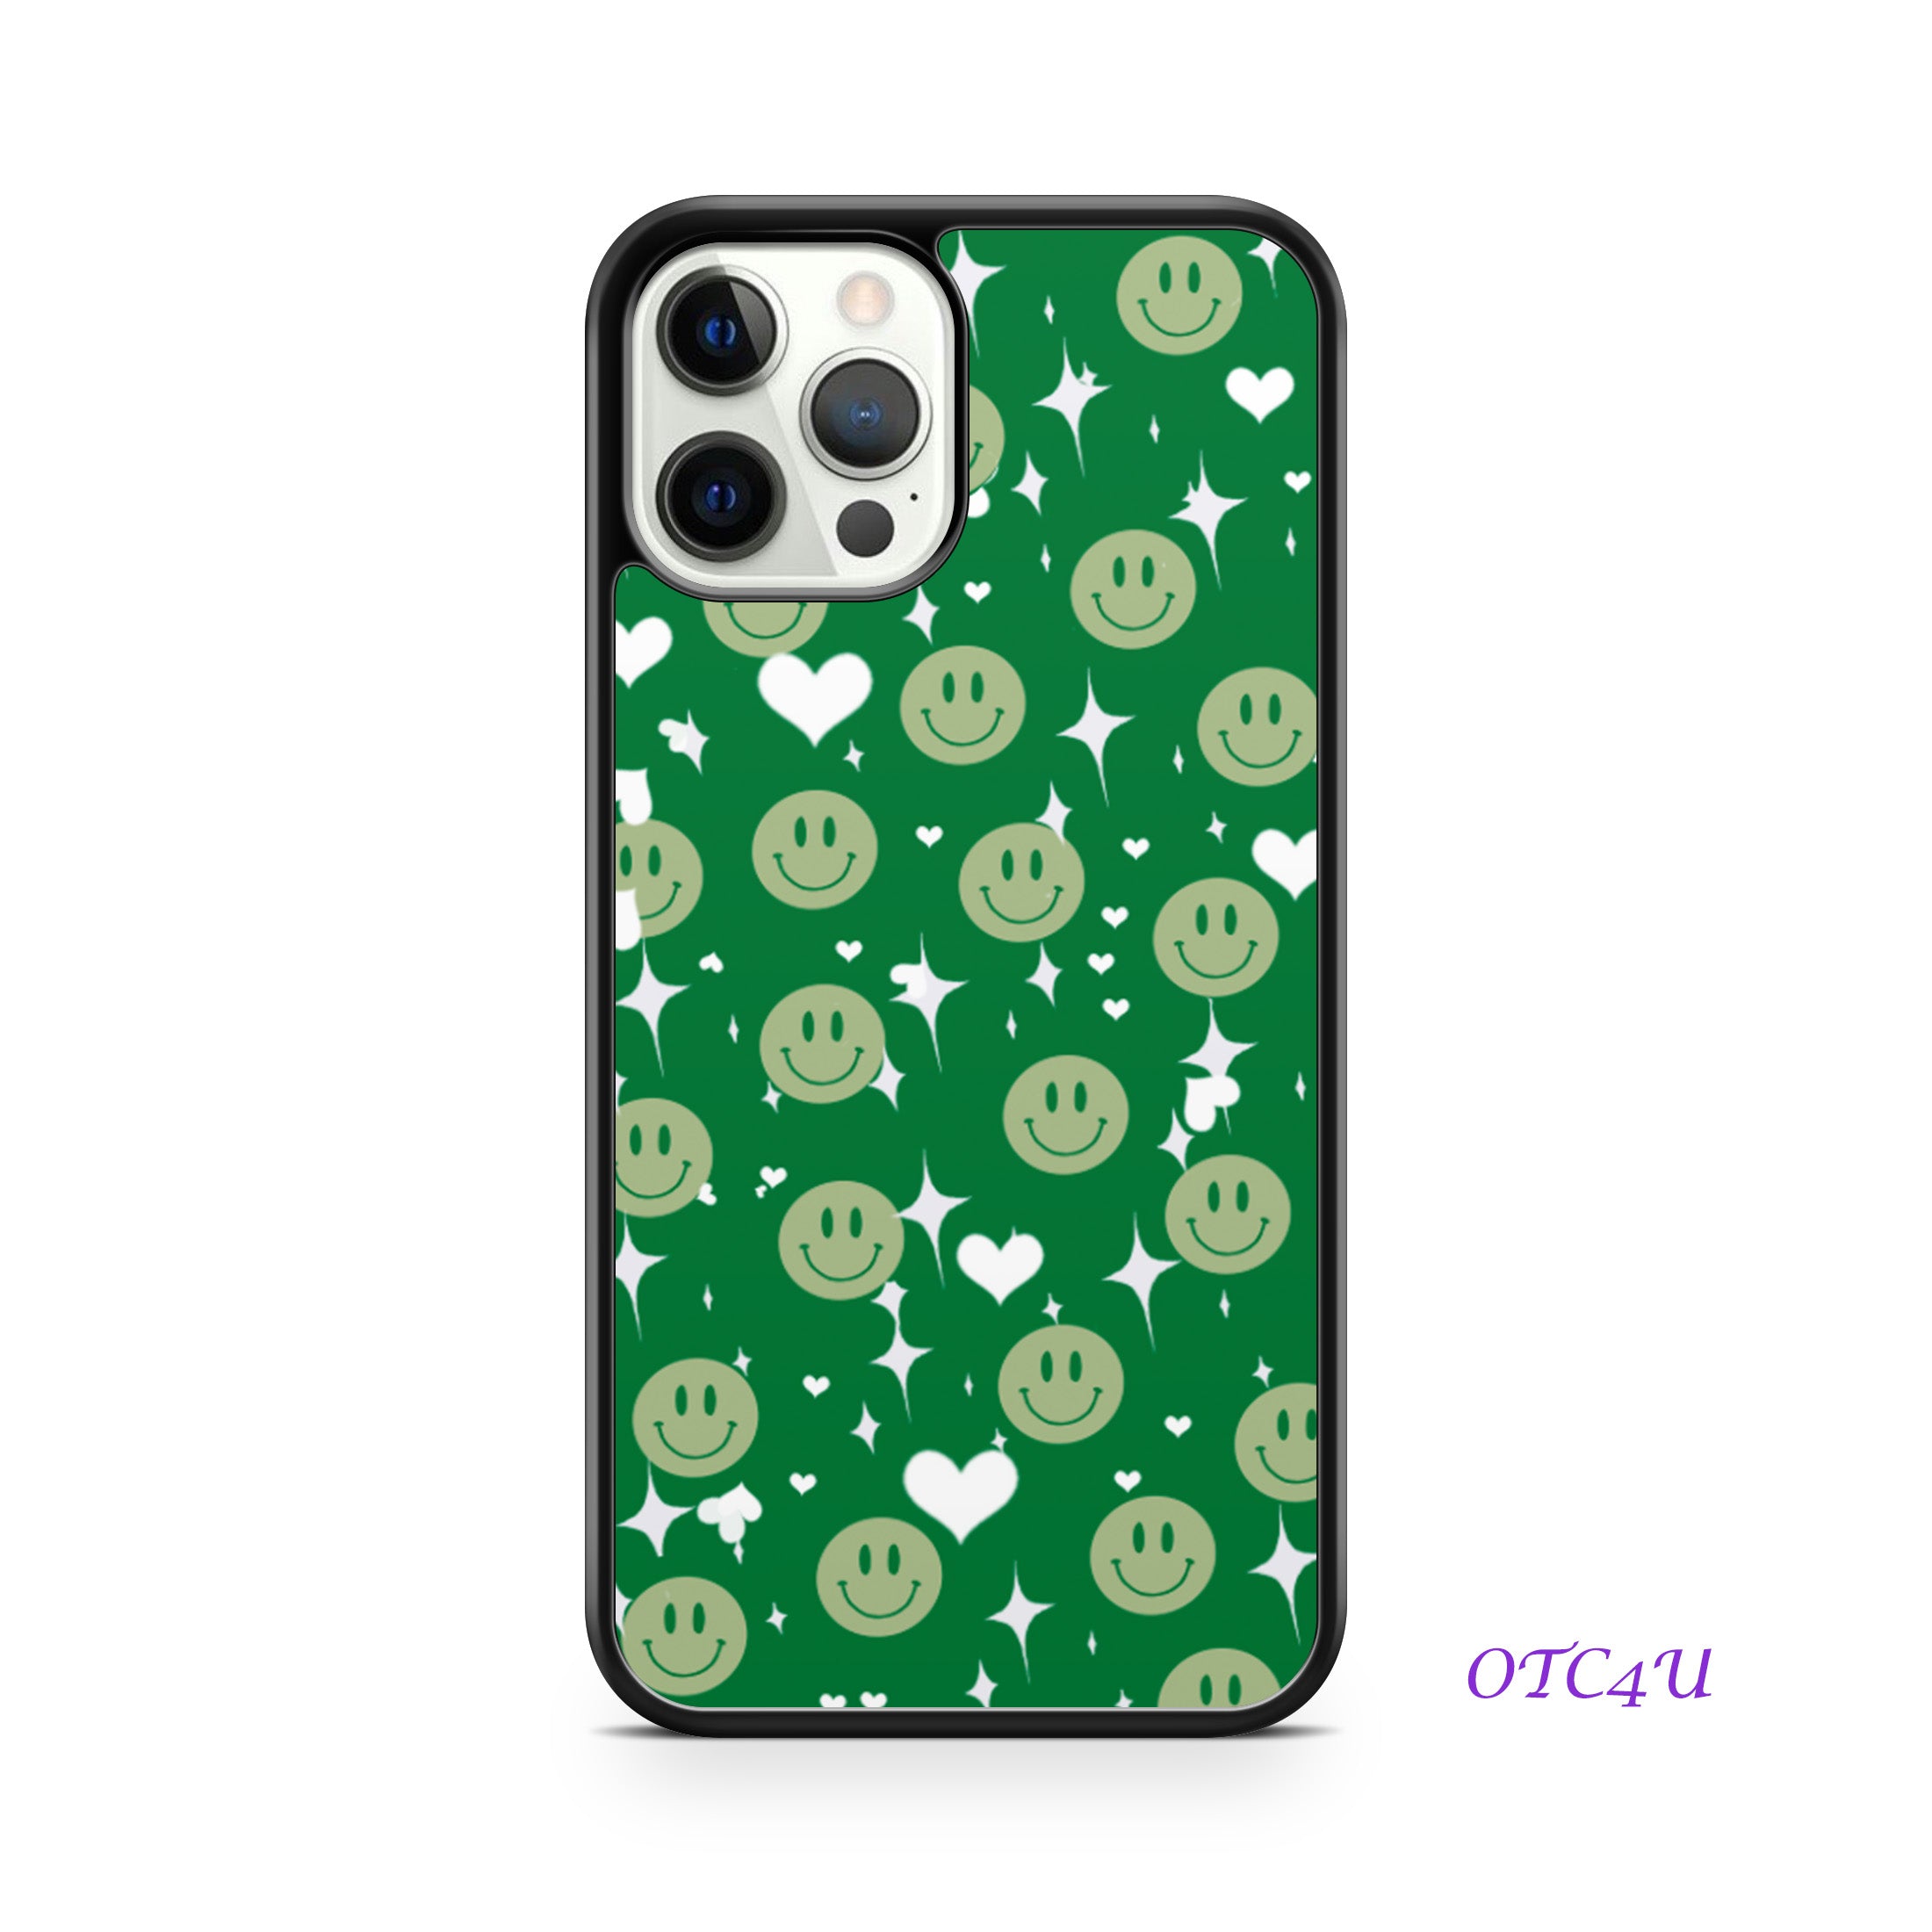 Smiley faces with hearts and stars print Phone Case for SAMSUNG phone models - OnTheCase4U